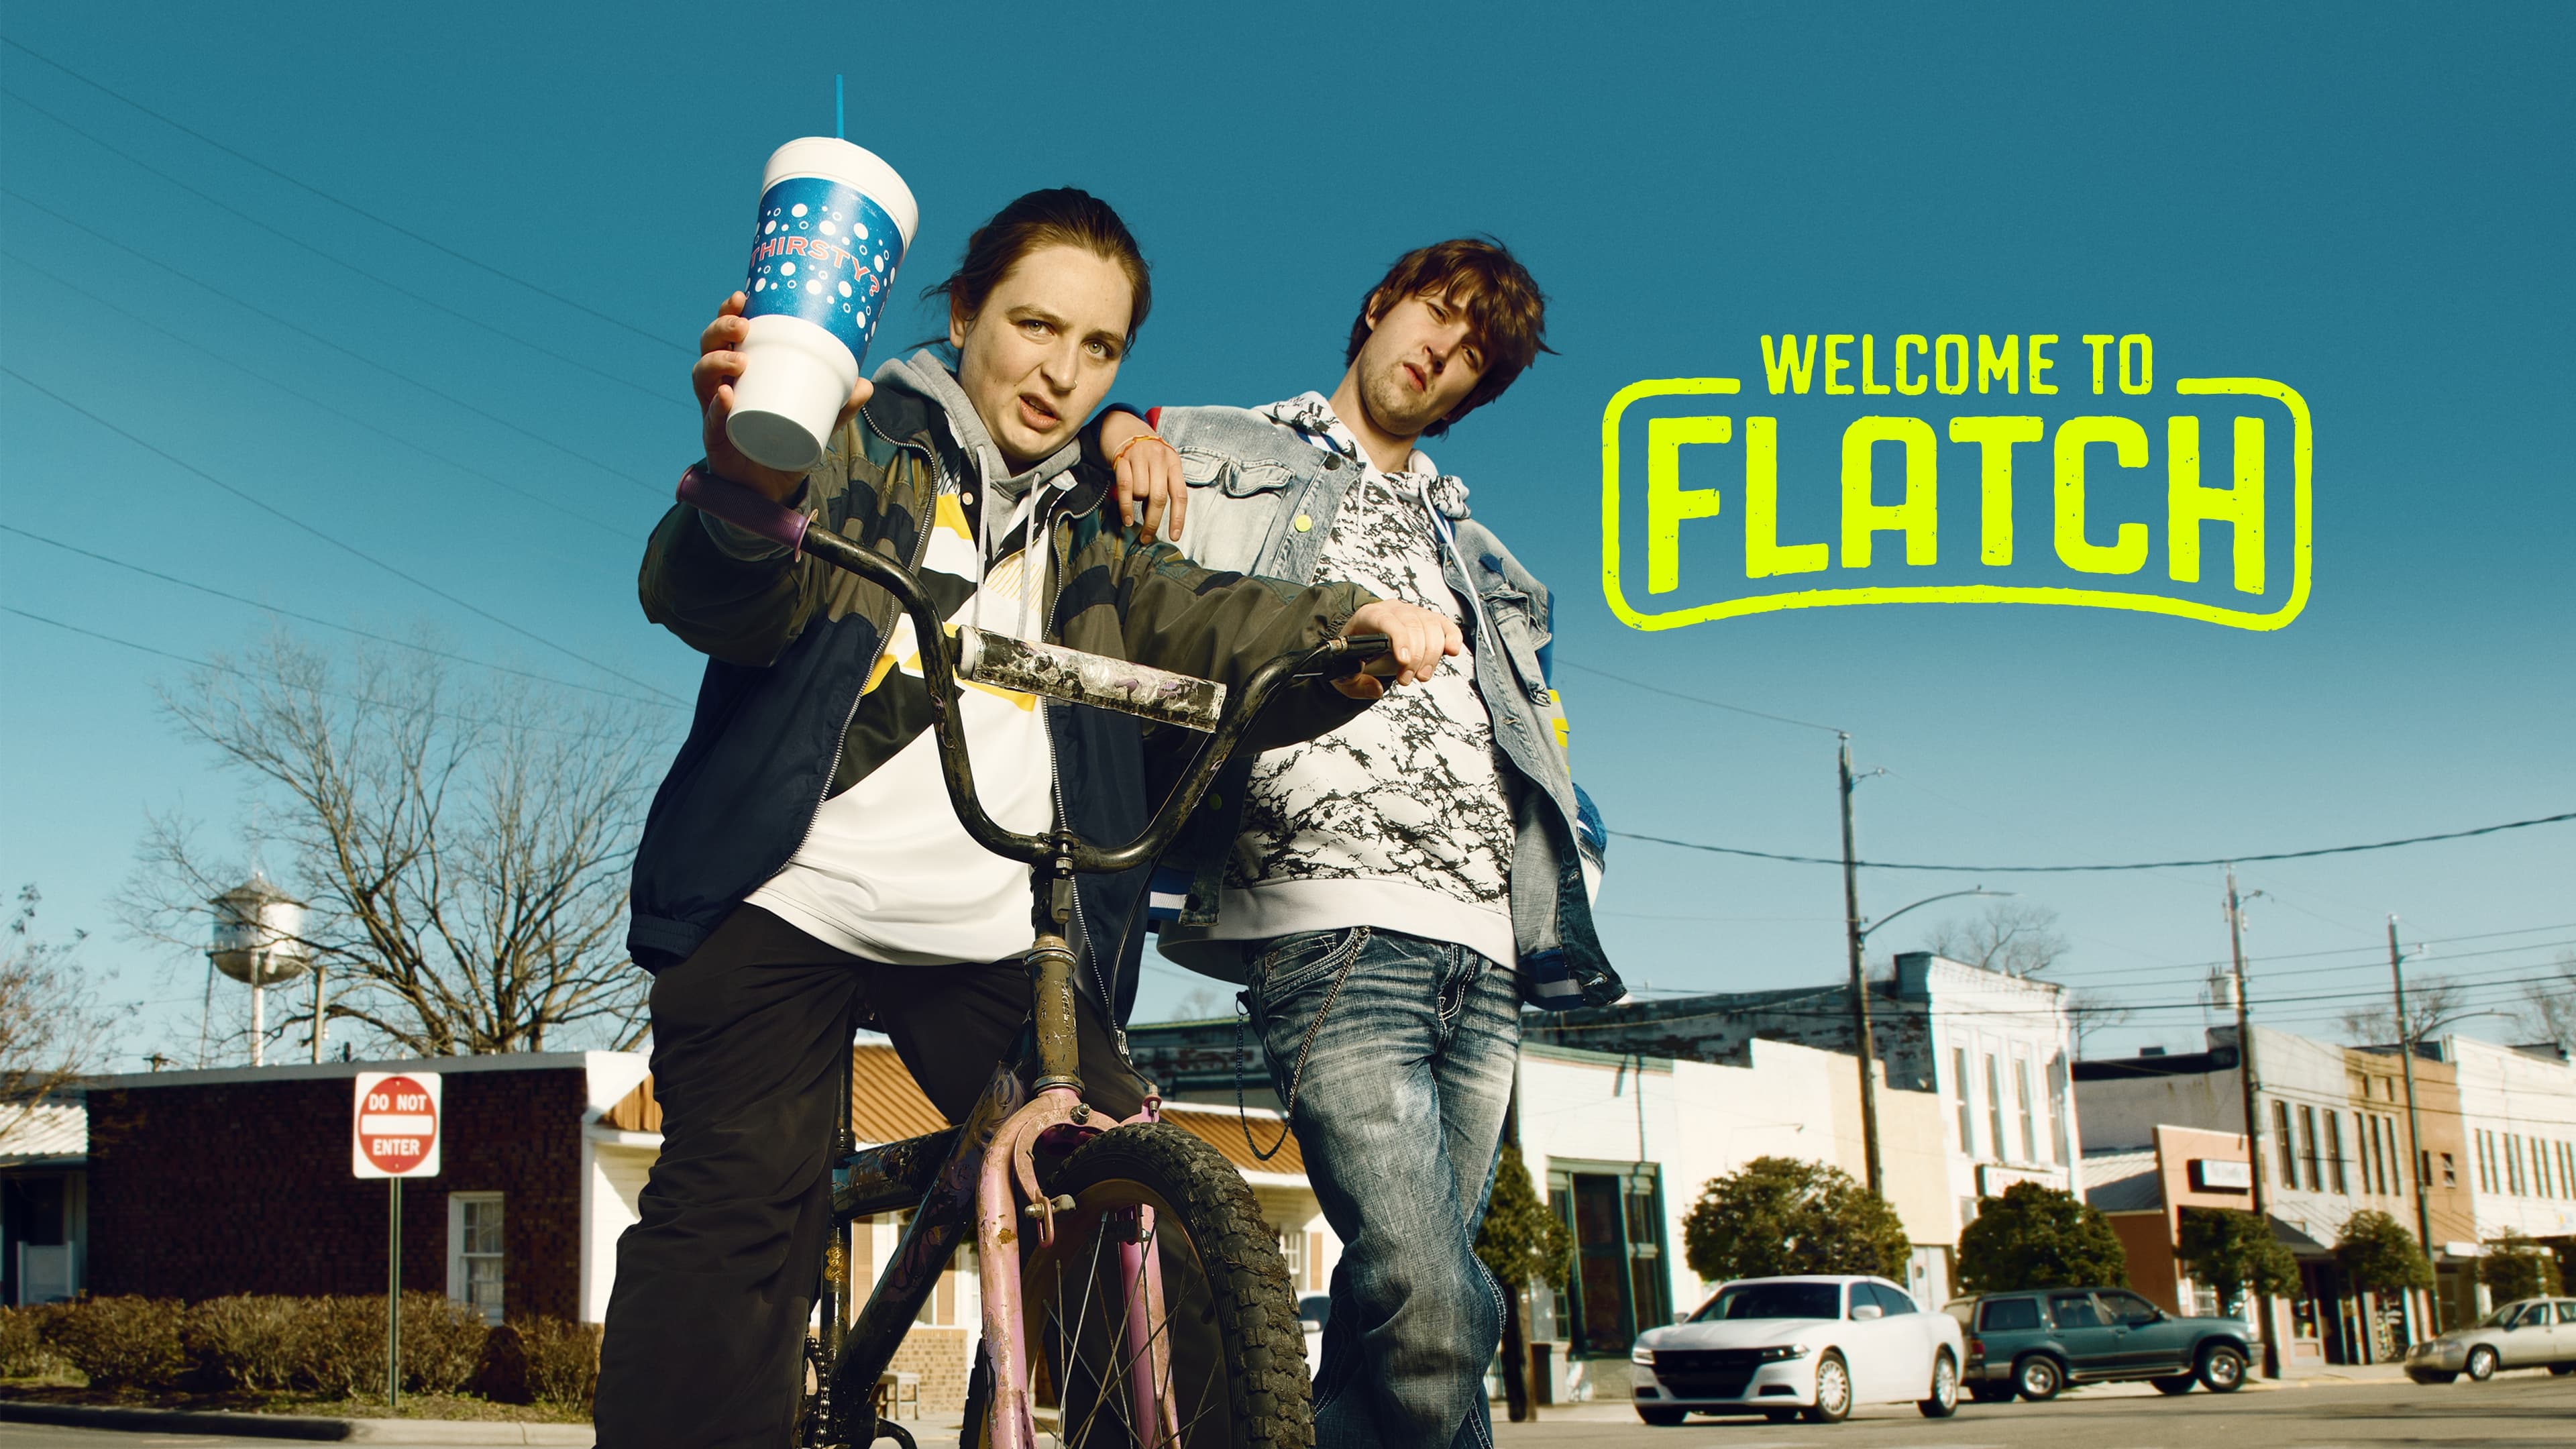 Welcome to Flatch May Make Viewers Wish to Depart City